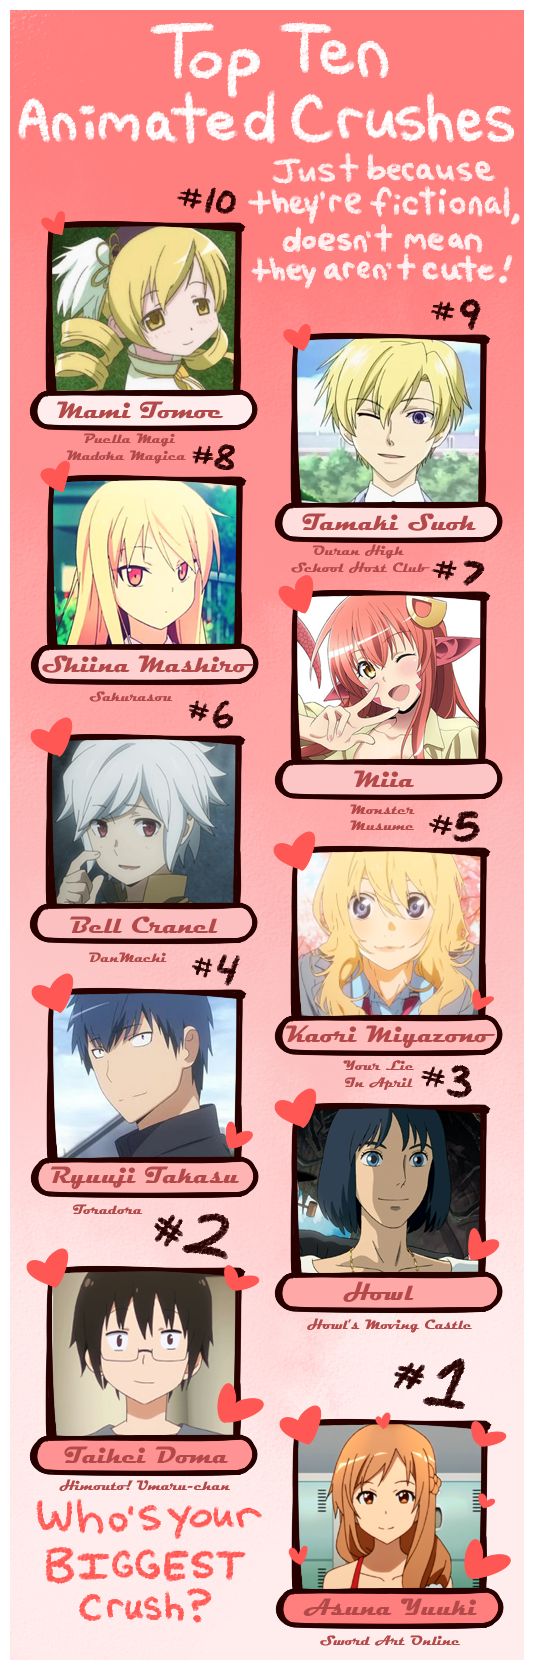 Top 10 Anime Crushes (Meme) by Riveree on DeviantArt